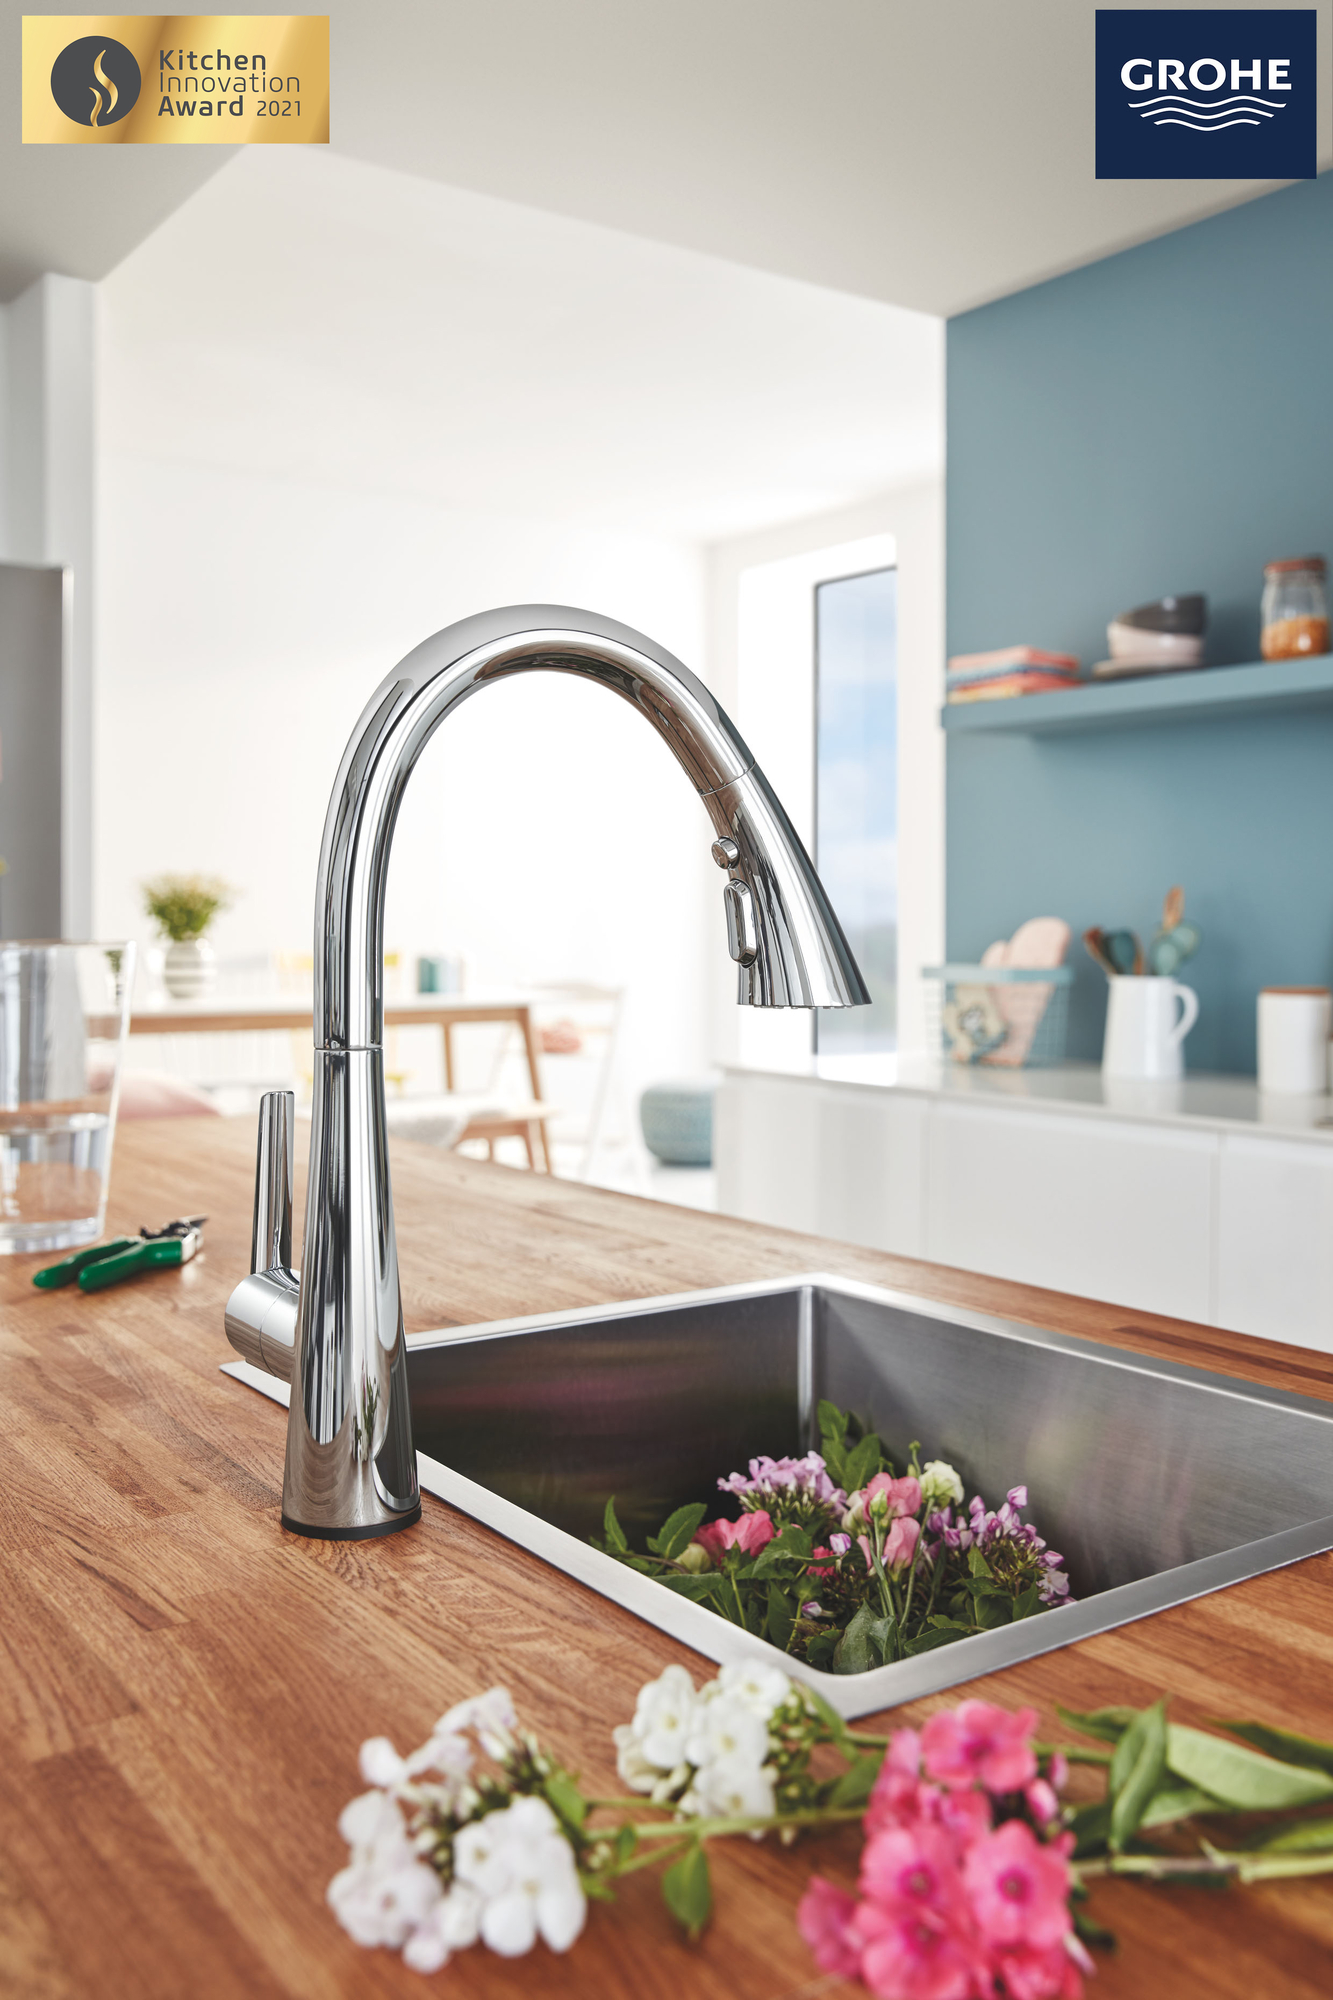 Zedra Kitchen Faucet By Grohe Wins The